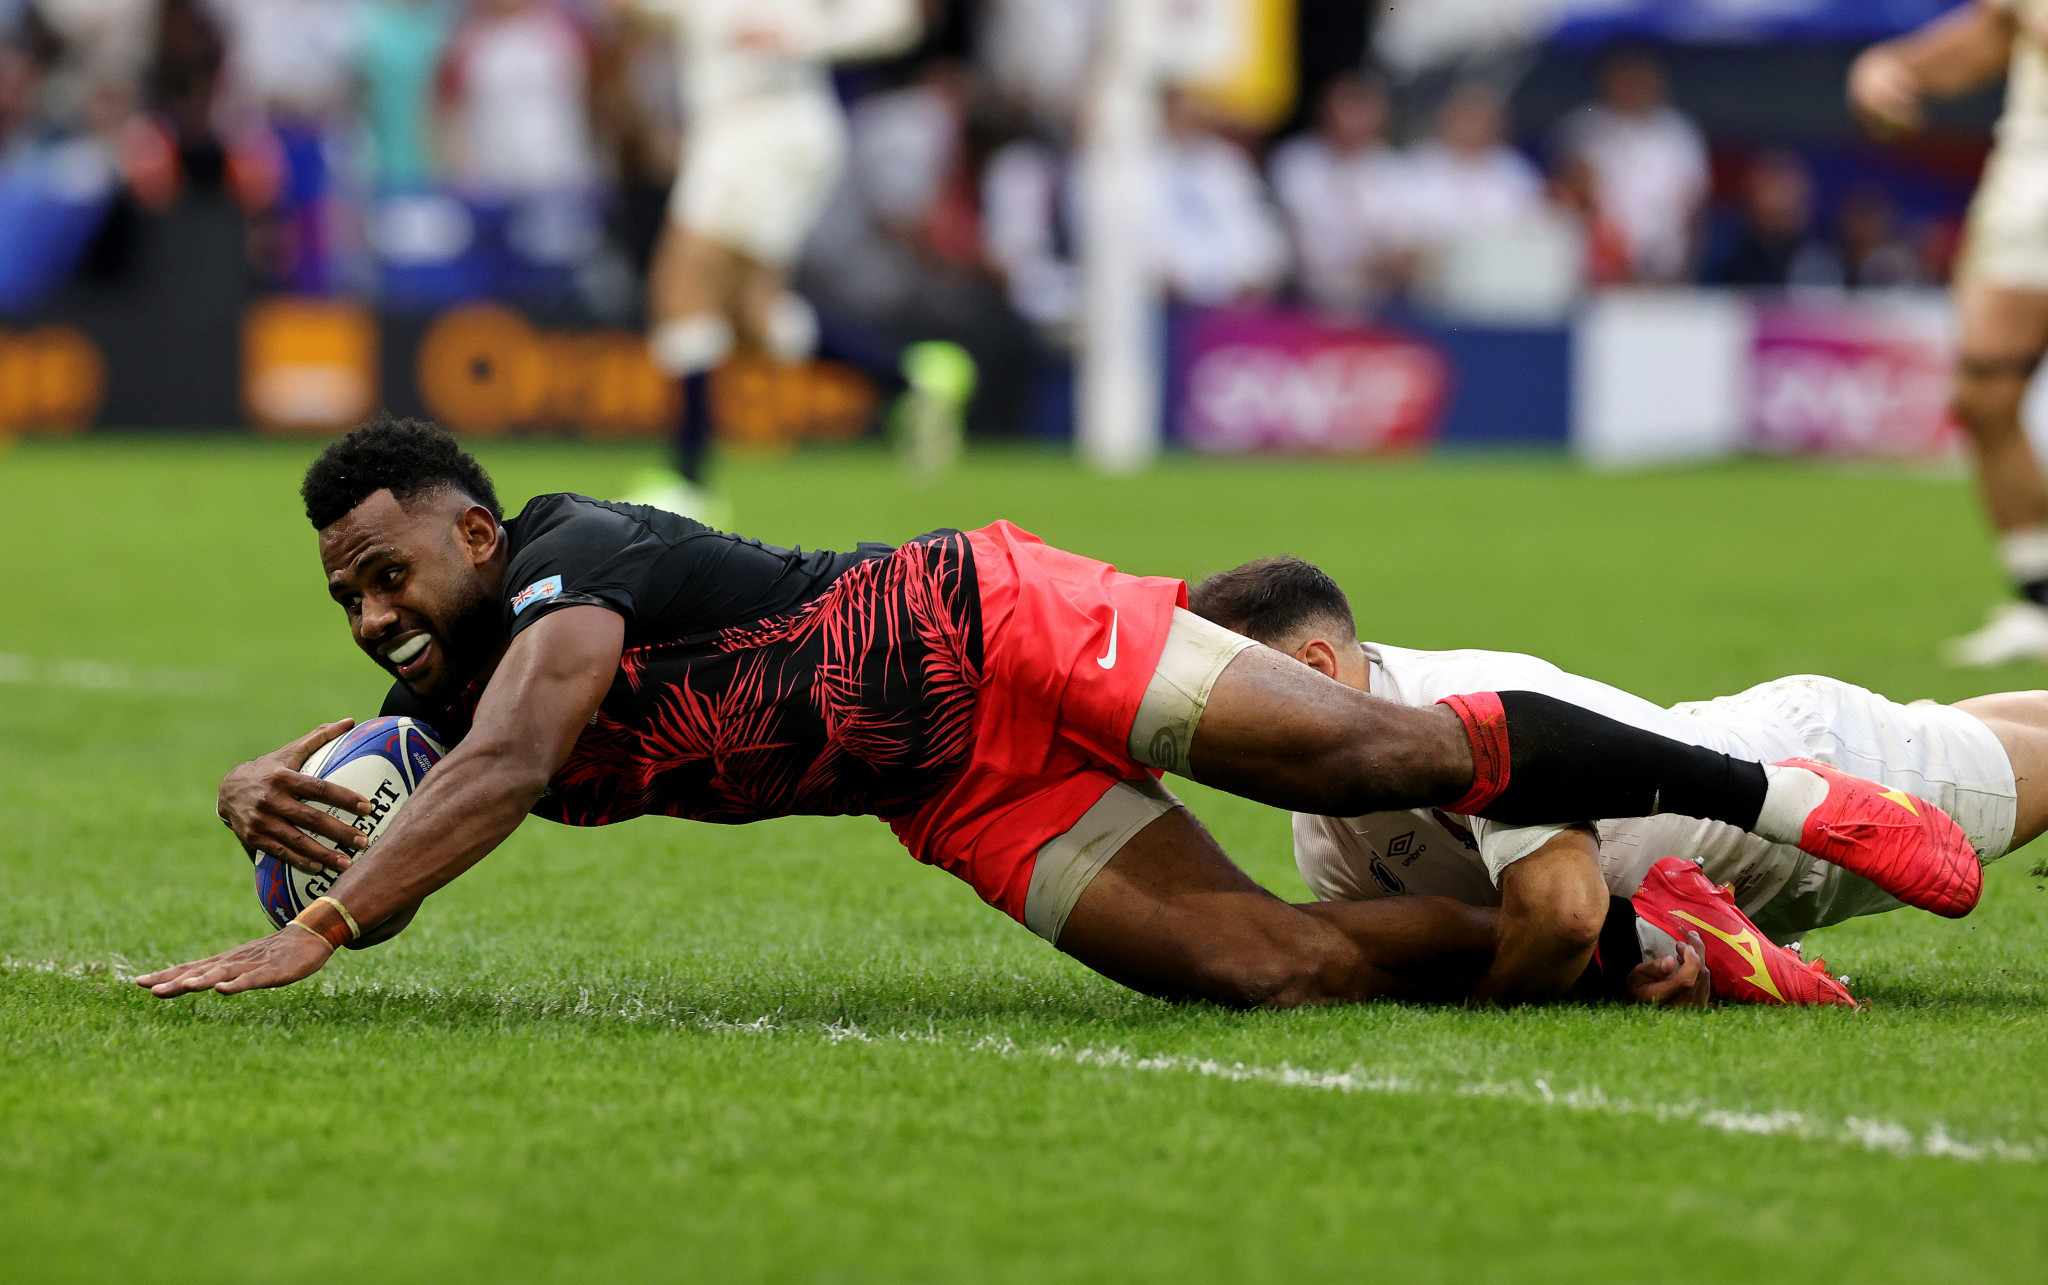 Fijian fly-half Vilimoni Botitu then scored four minutes later to set up a thrilling finish ©Getty Images